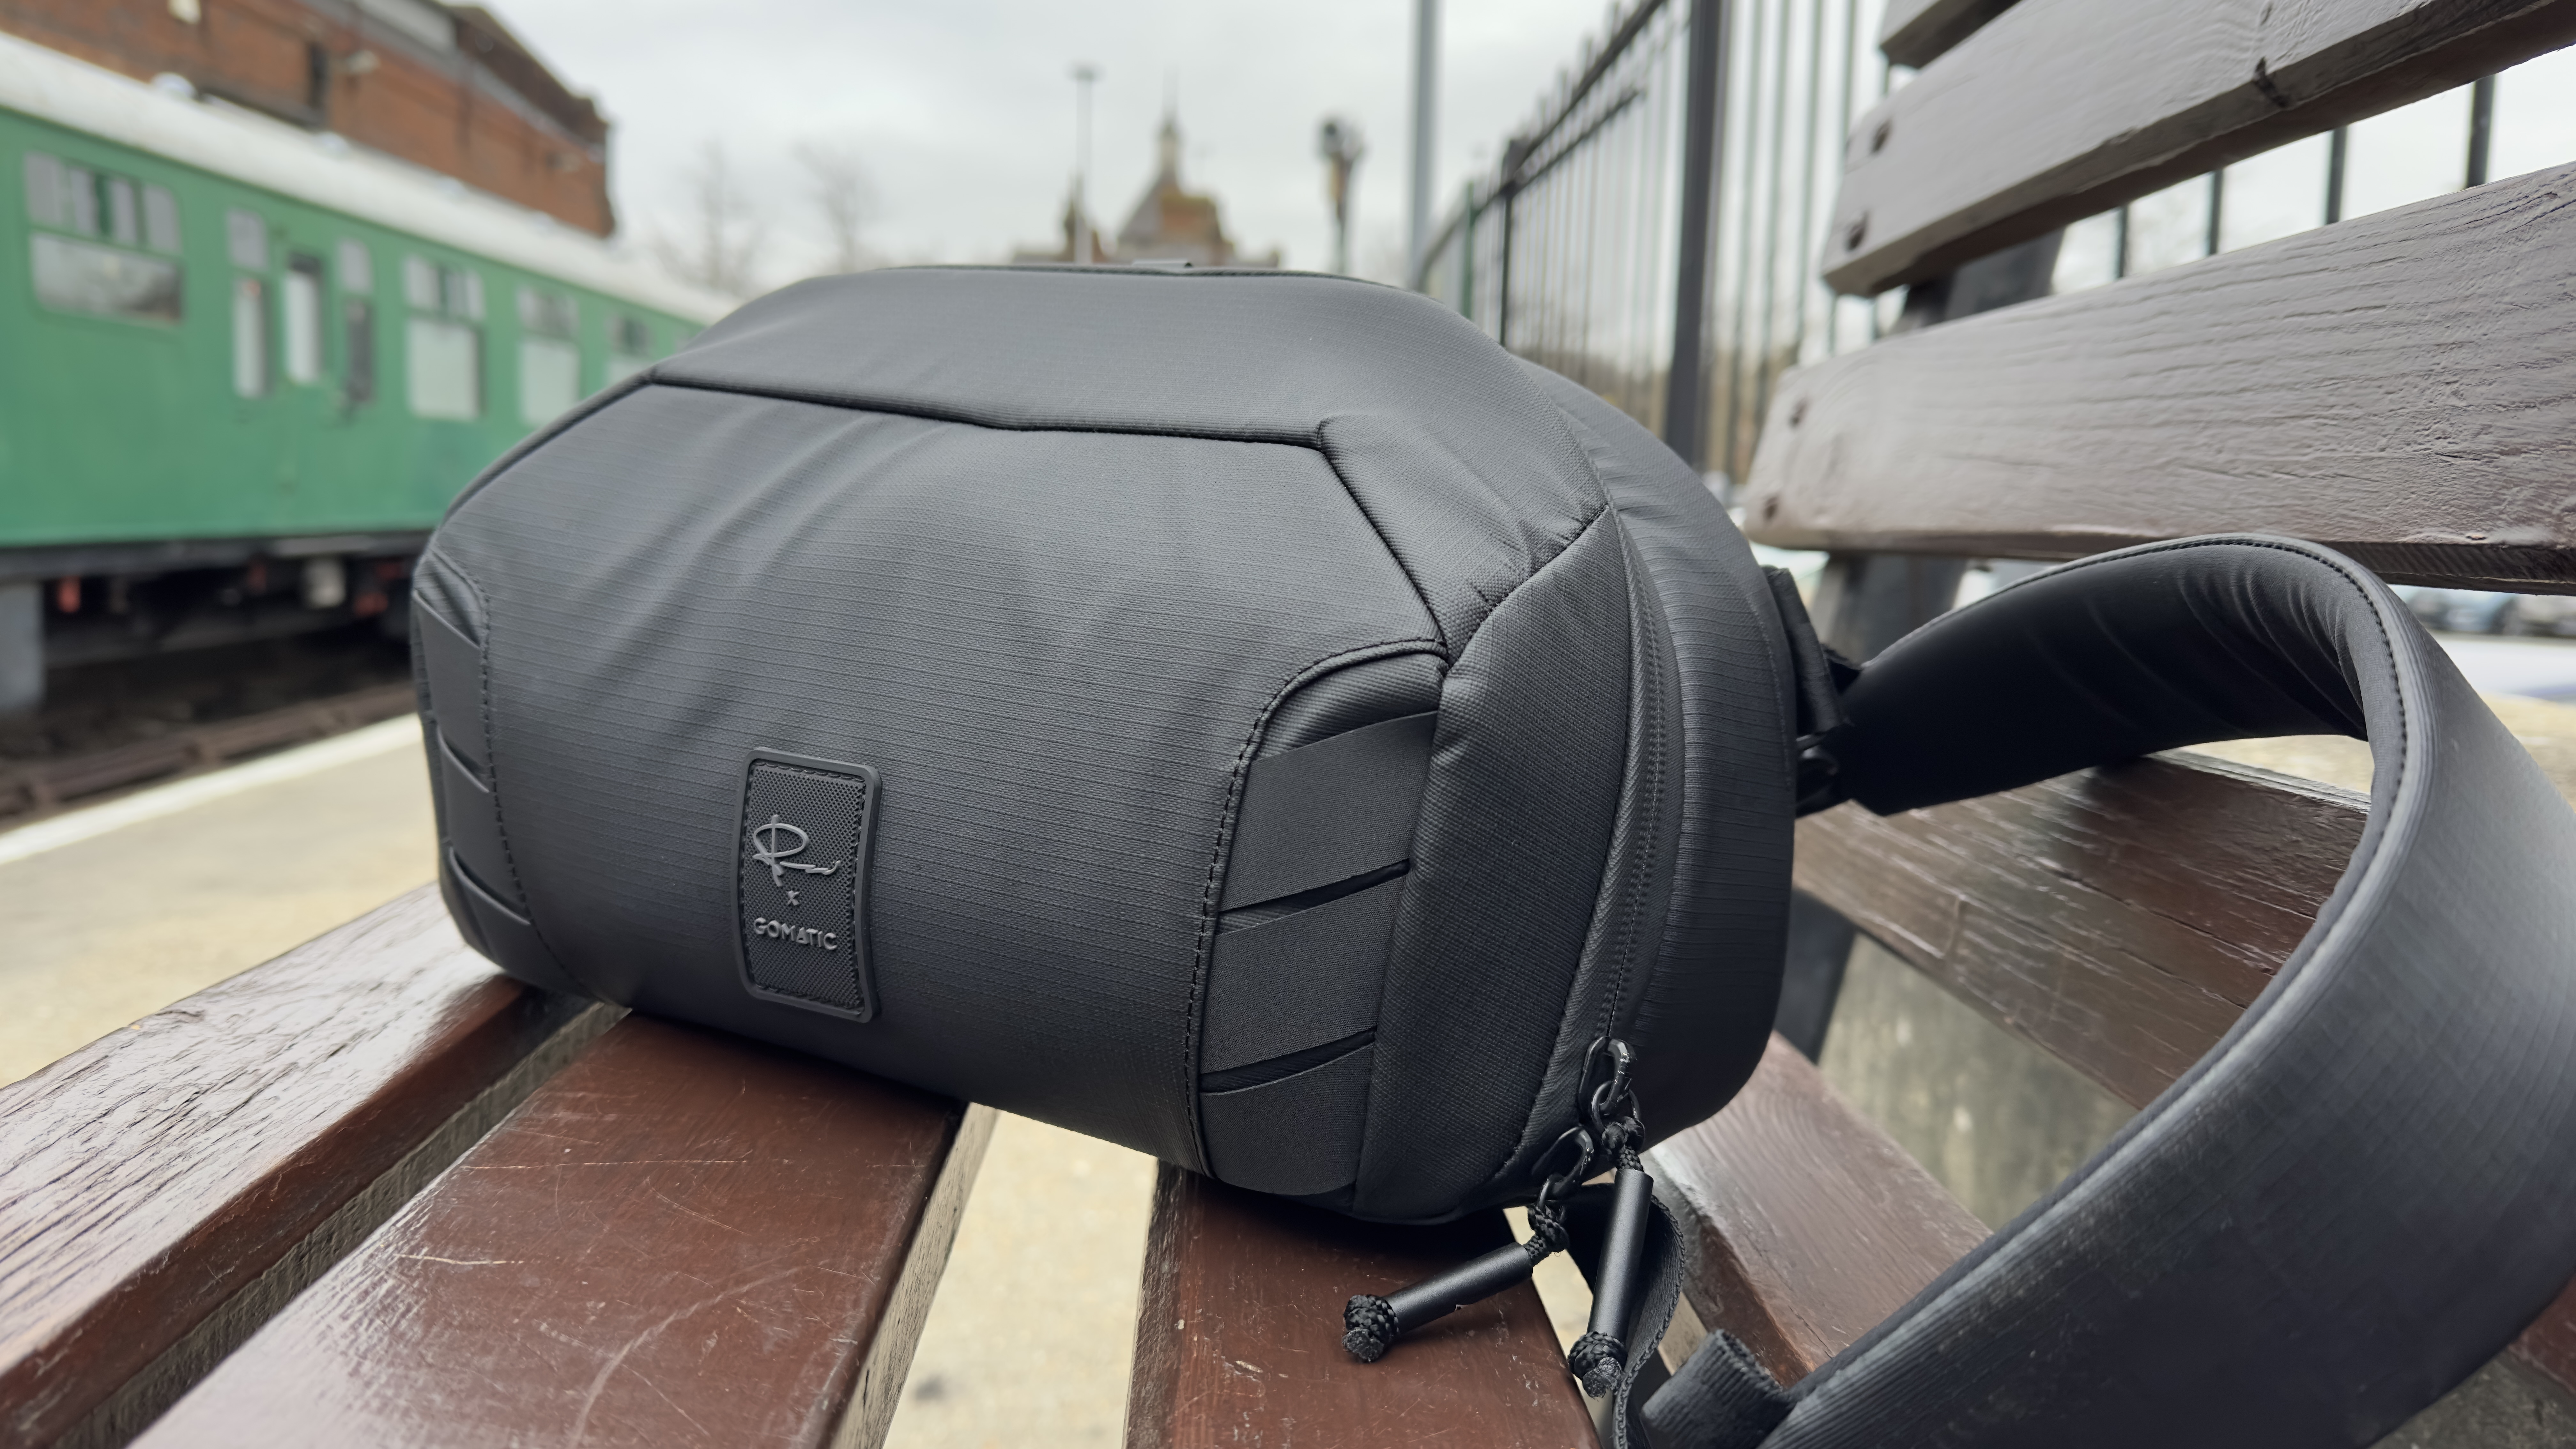 Peter McKinnon Camera Sling review: A nearly perfect camera bag